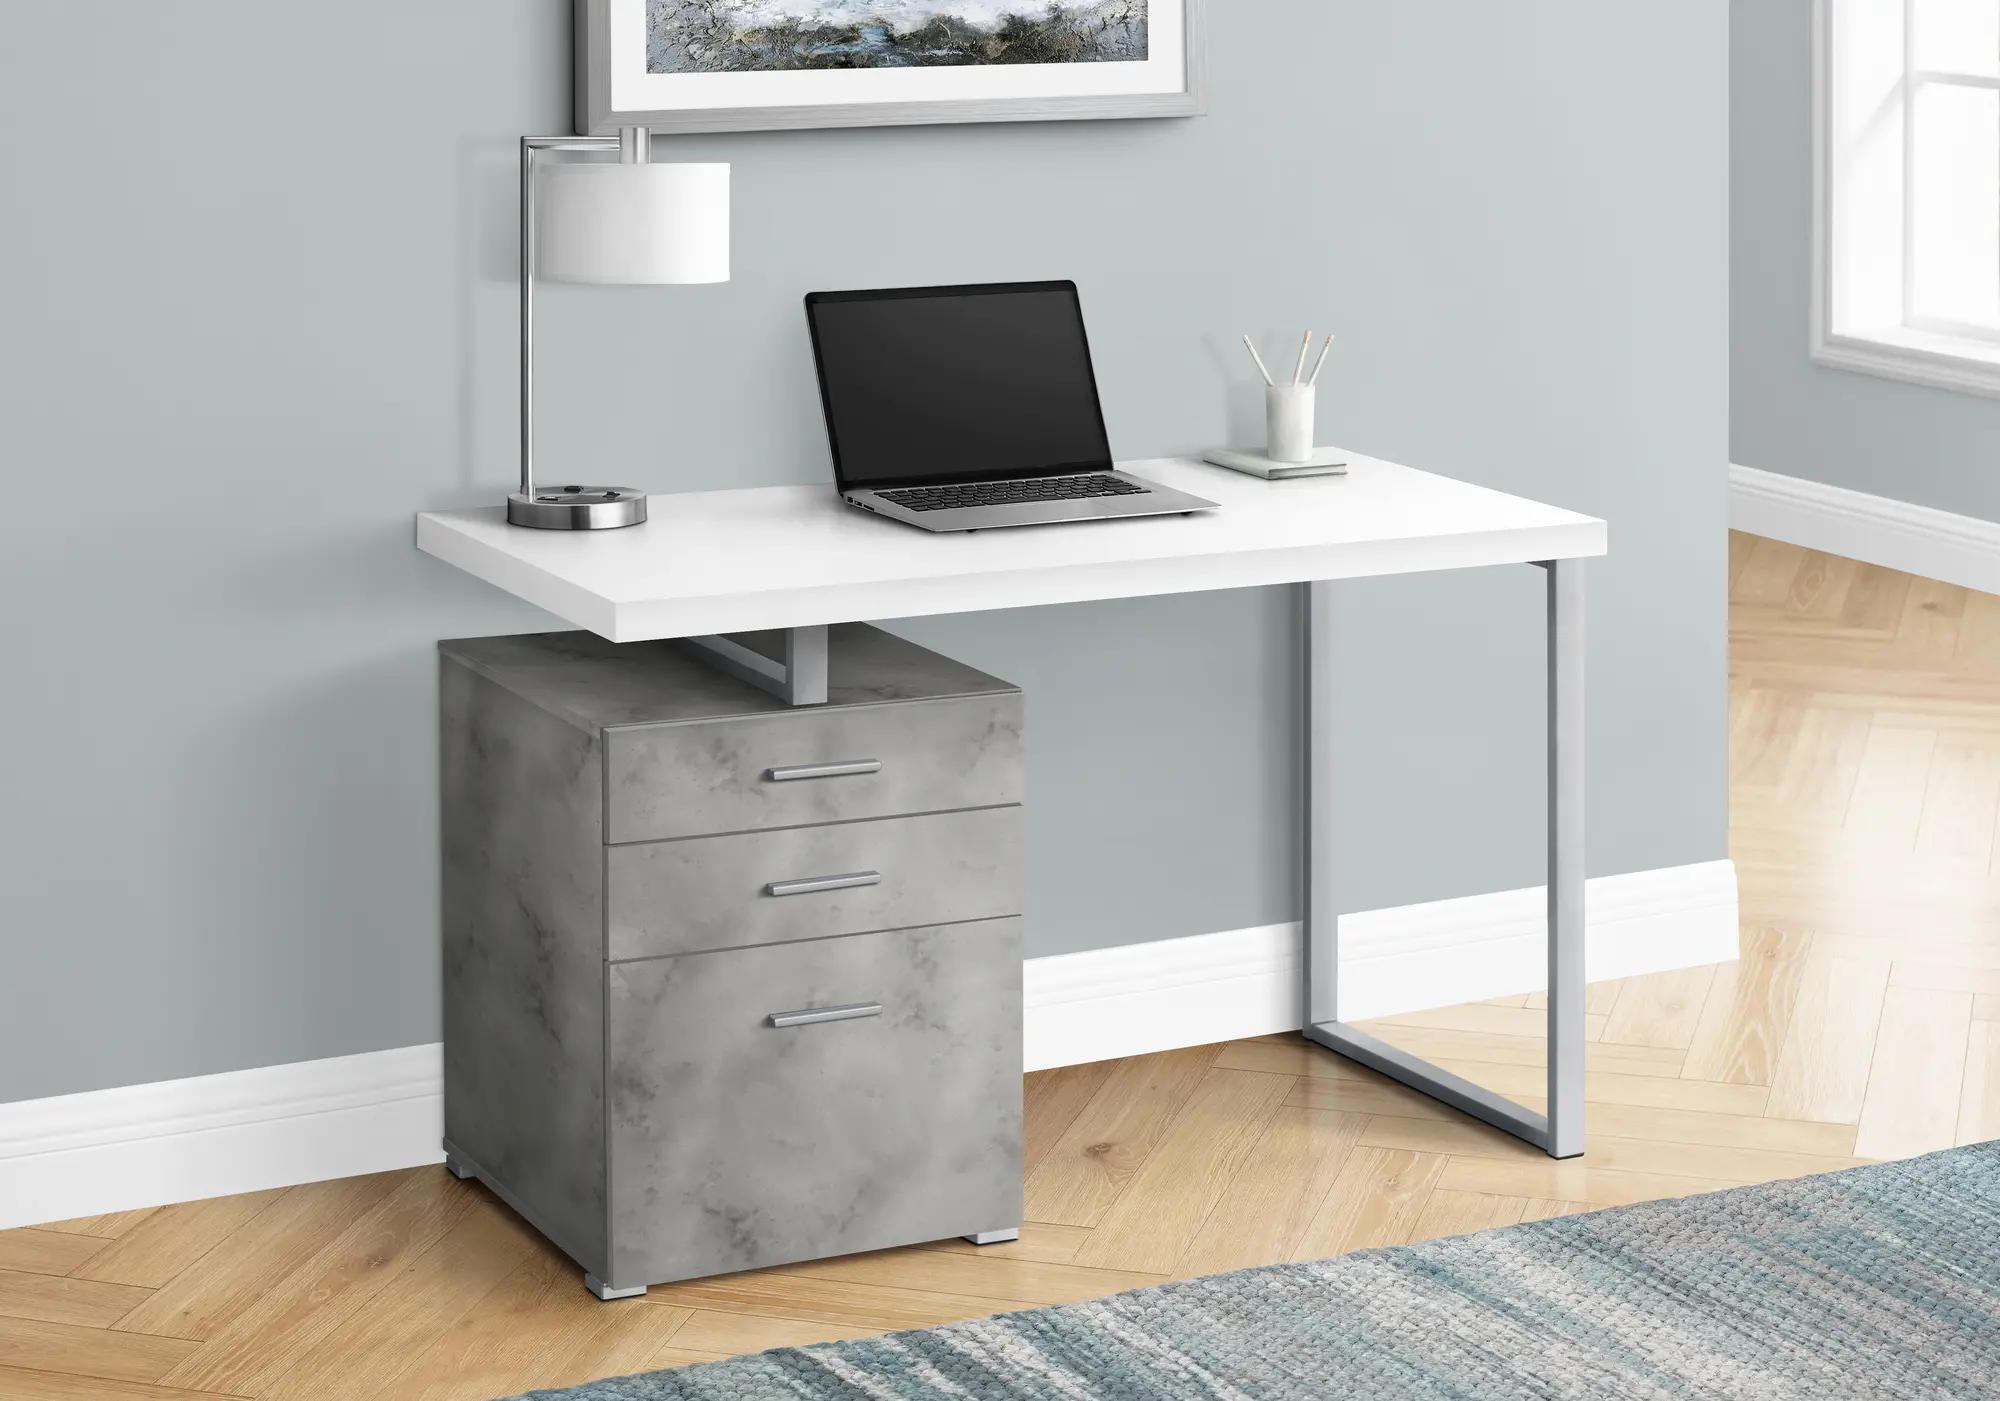 https://static.rcwilley.com/products/112325882/Concrete-and-White-Computer-Desk-with-File-Cabinet-rcwilley-image1.webp